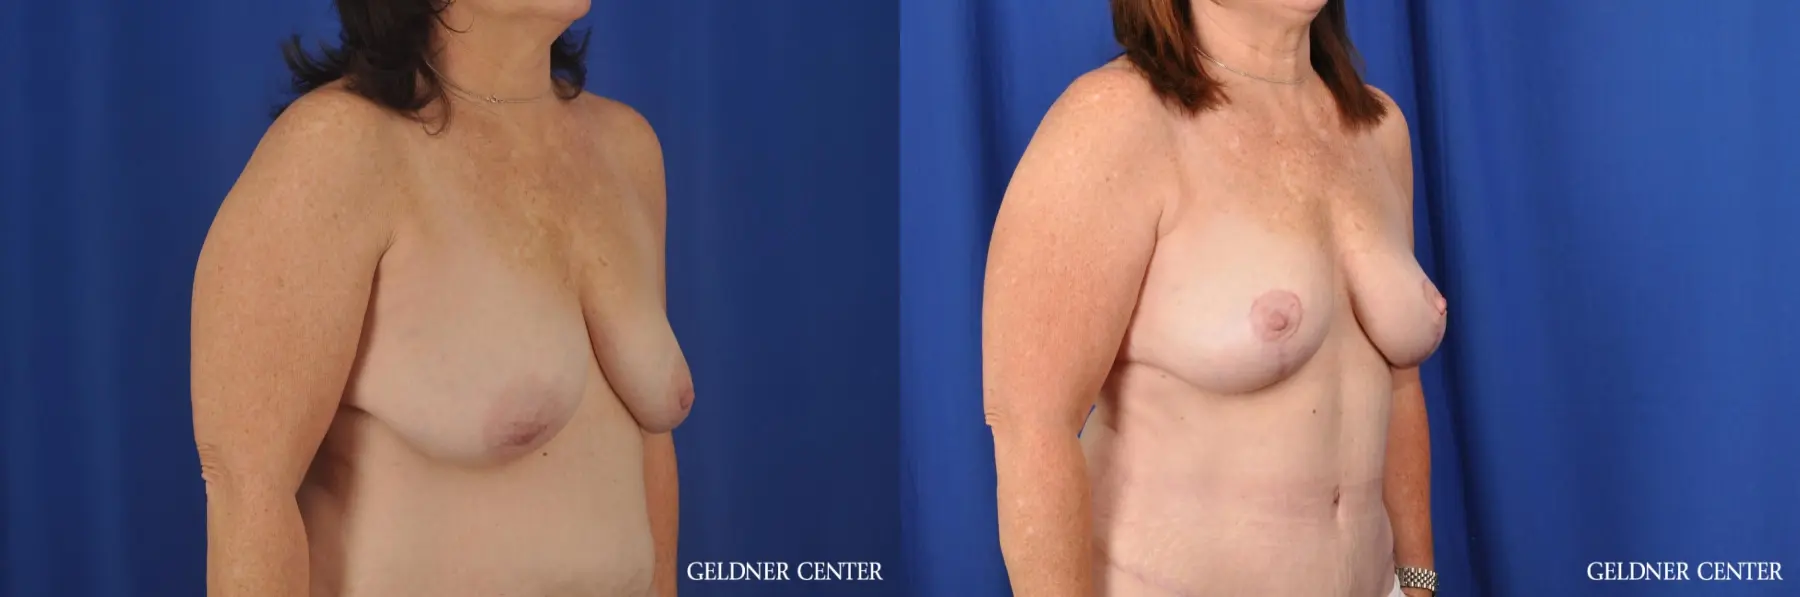 Breast Lift Hinsdale, Chicago 3232 - Before and After 3